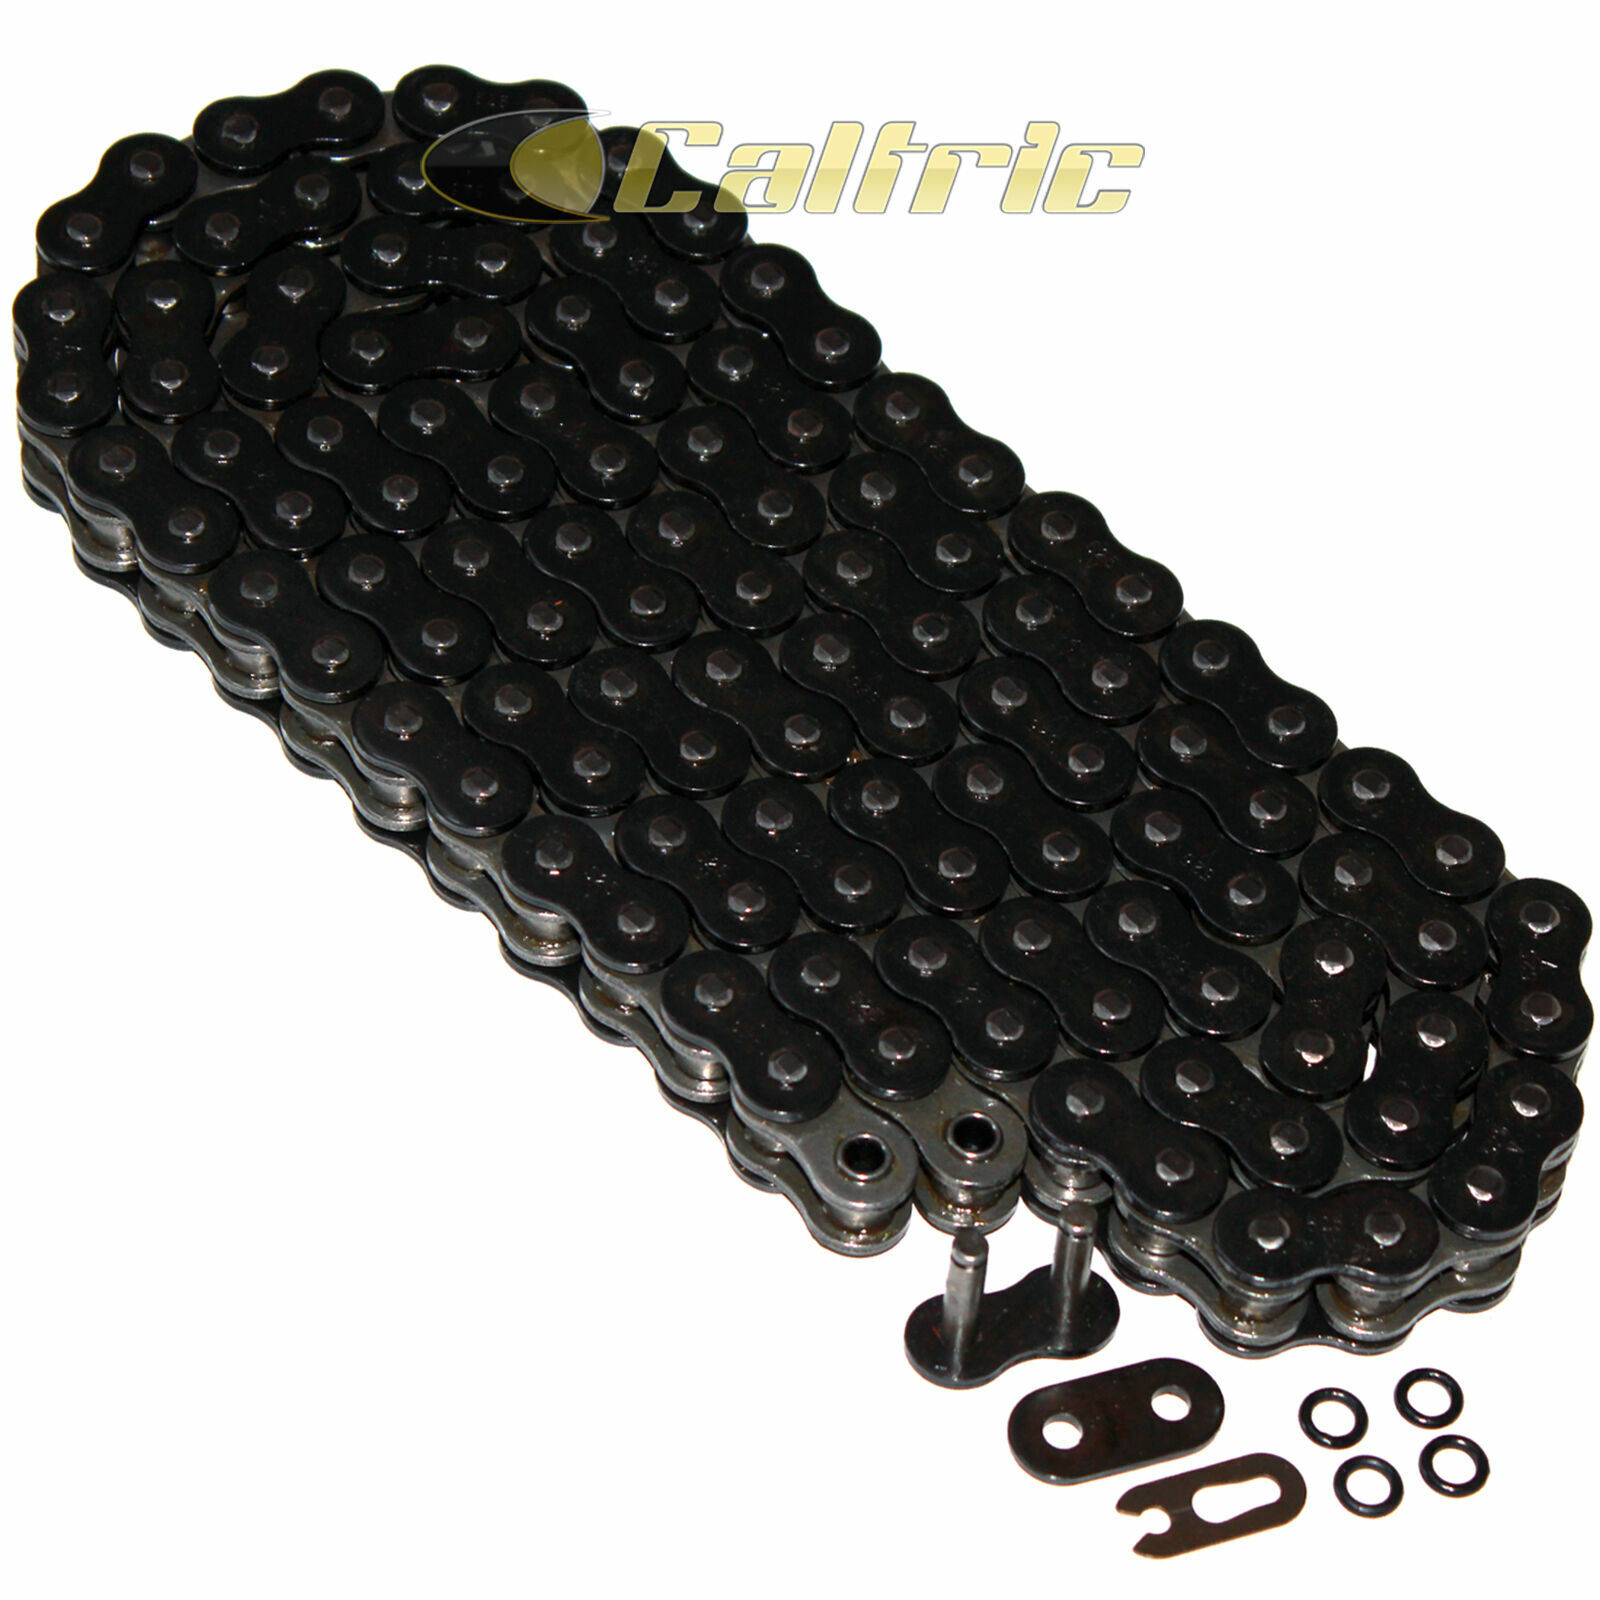 Caltric Black Drive Chain And Sprocket Kit Compatible with Honda Cb600F 599 2004 2006 